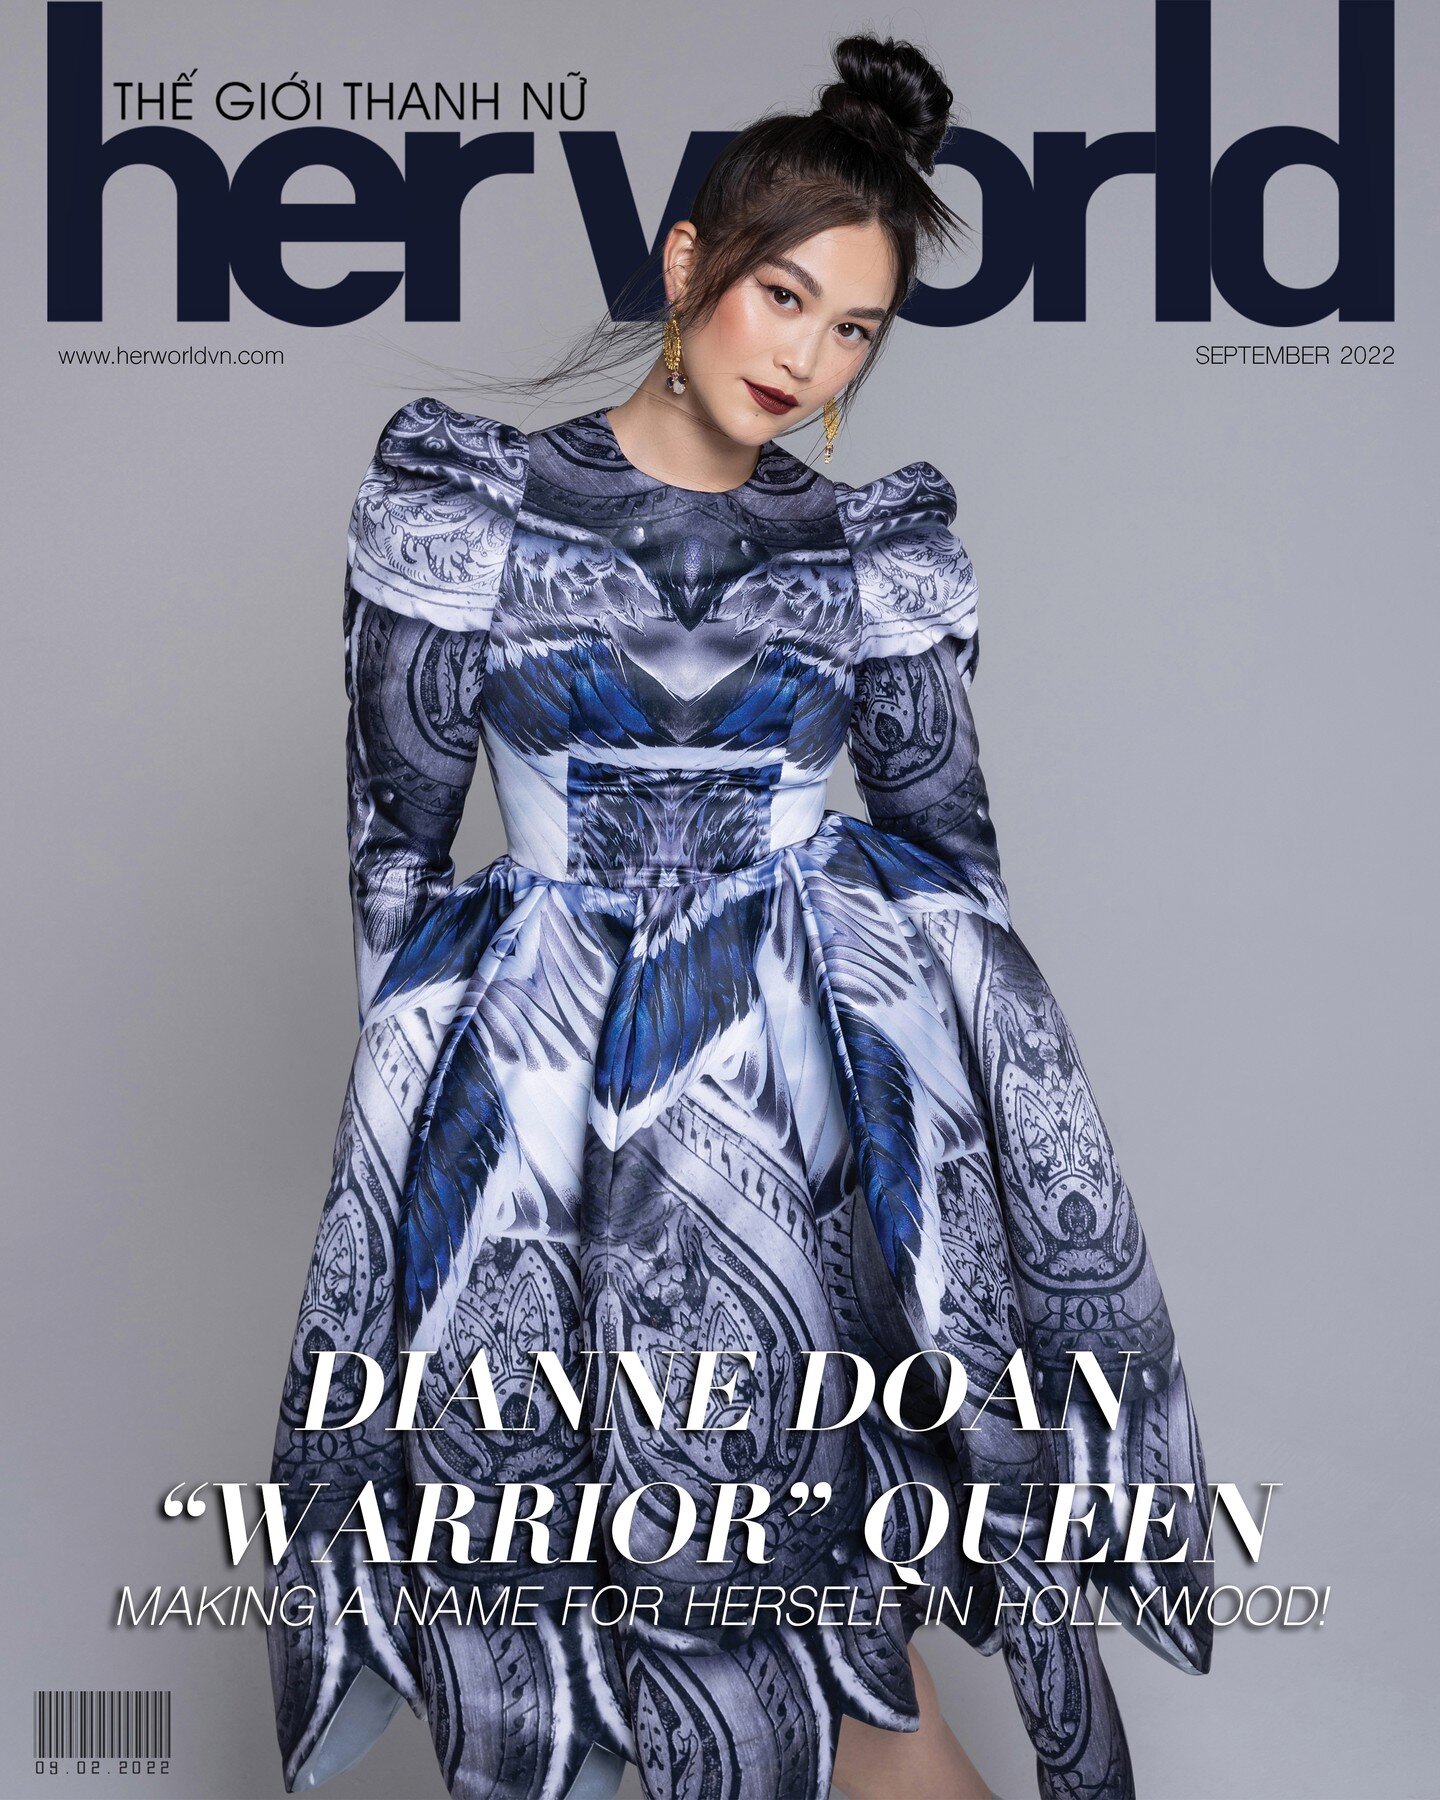 September Issue with the Stunning actress, DIANNE DOAN, &ldquo;WARRIOR&rdquo; Queen making a name for herself in Hollywood!
_
https://herworldvn.com/nhan-vat-su-kien/ngoi-sao/dianne-doan-warrior-queen-making-a-name-for-herself-in-hollywood-7399485
_
